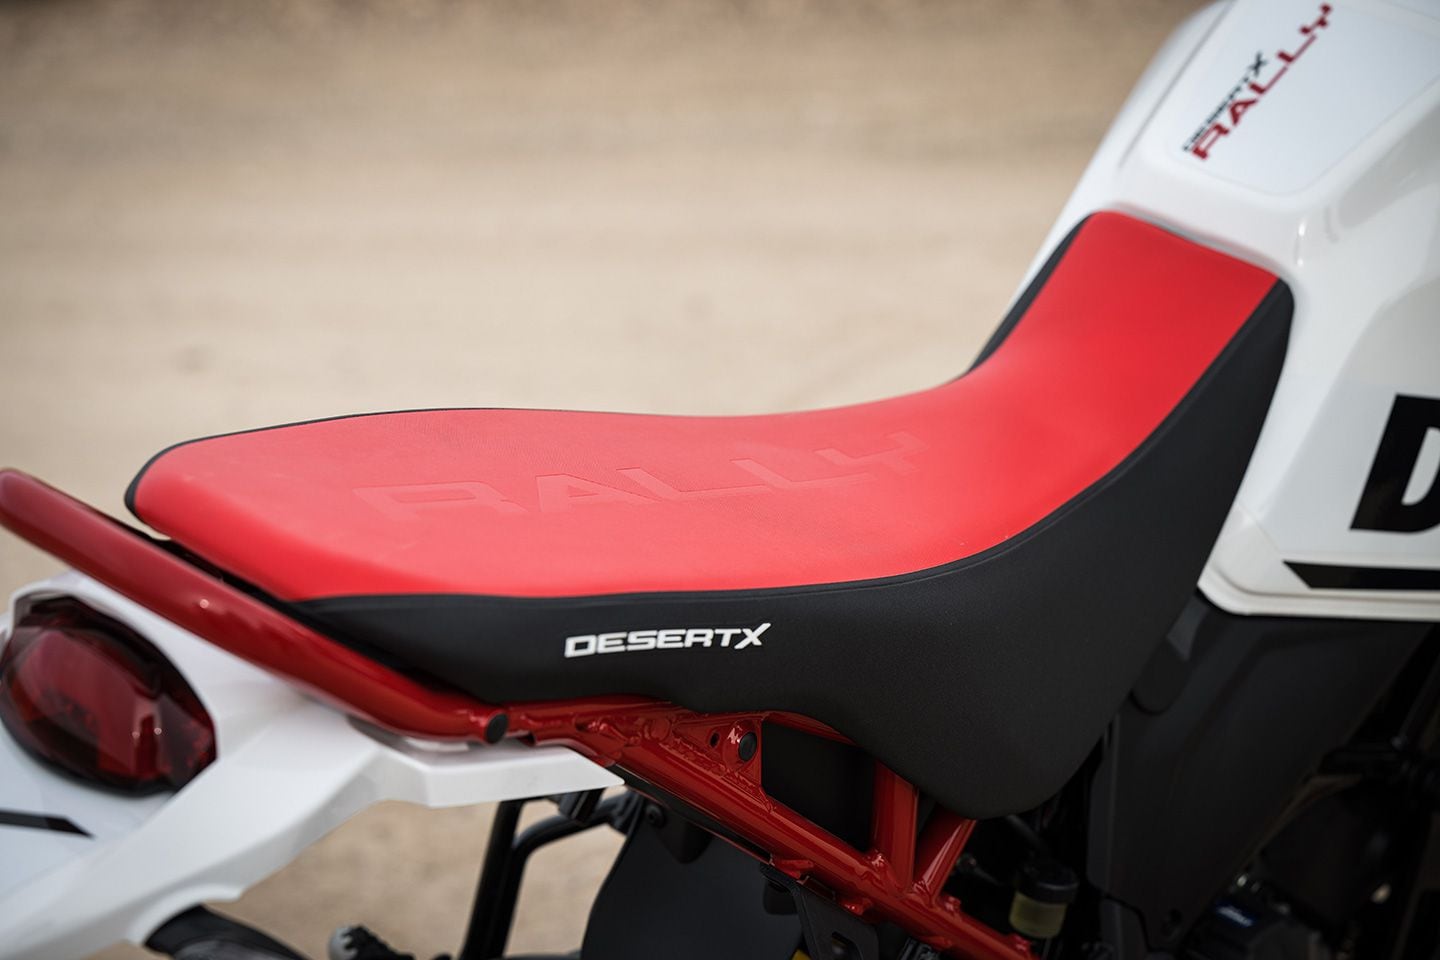 Seat height is tall, but the seat itself is narrow enough to allow shorter riders to get at least one foot down.